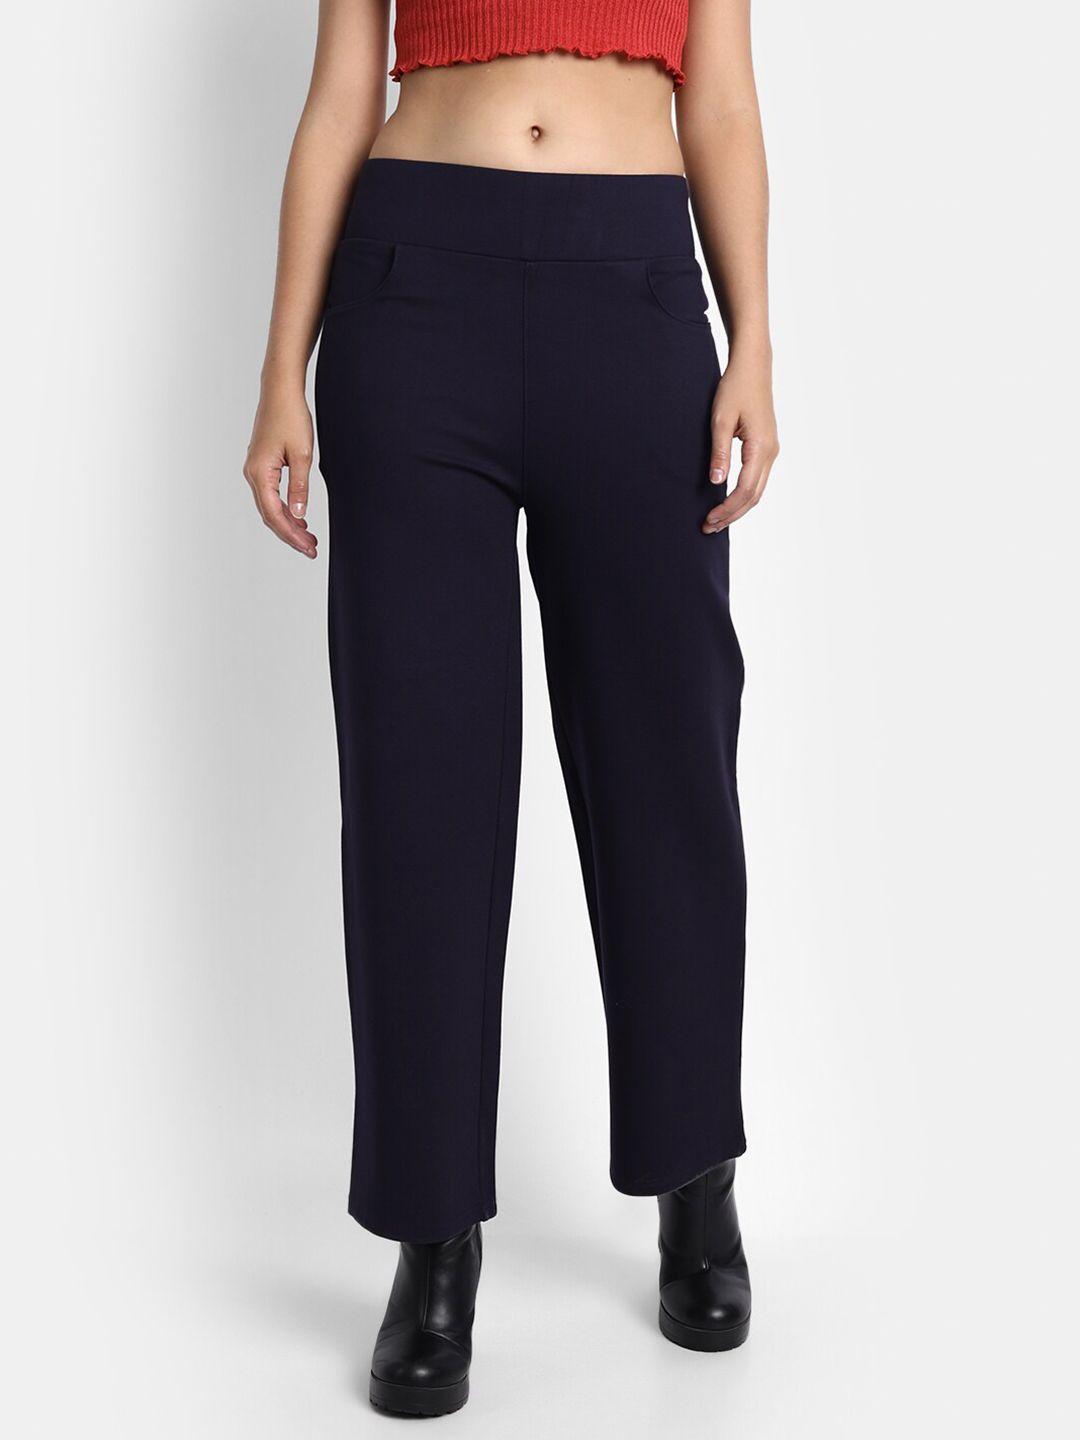 next one women navy blue solid high-rise jeggings